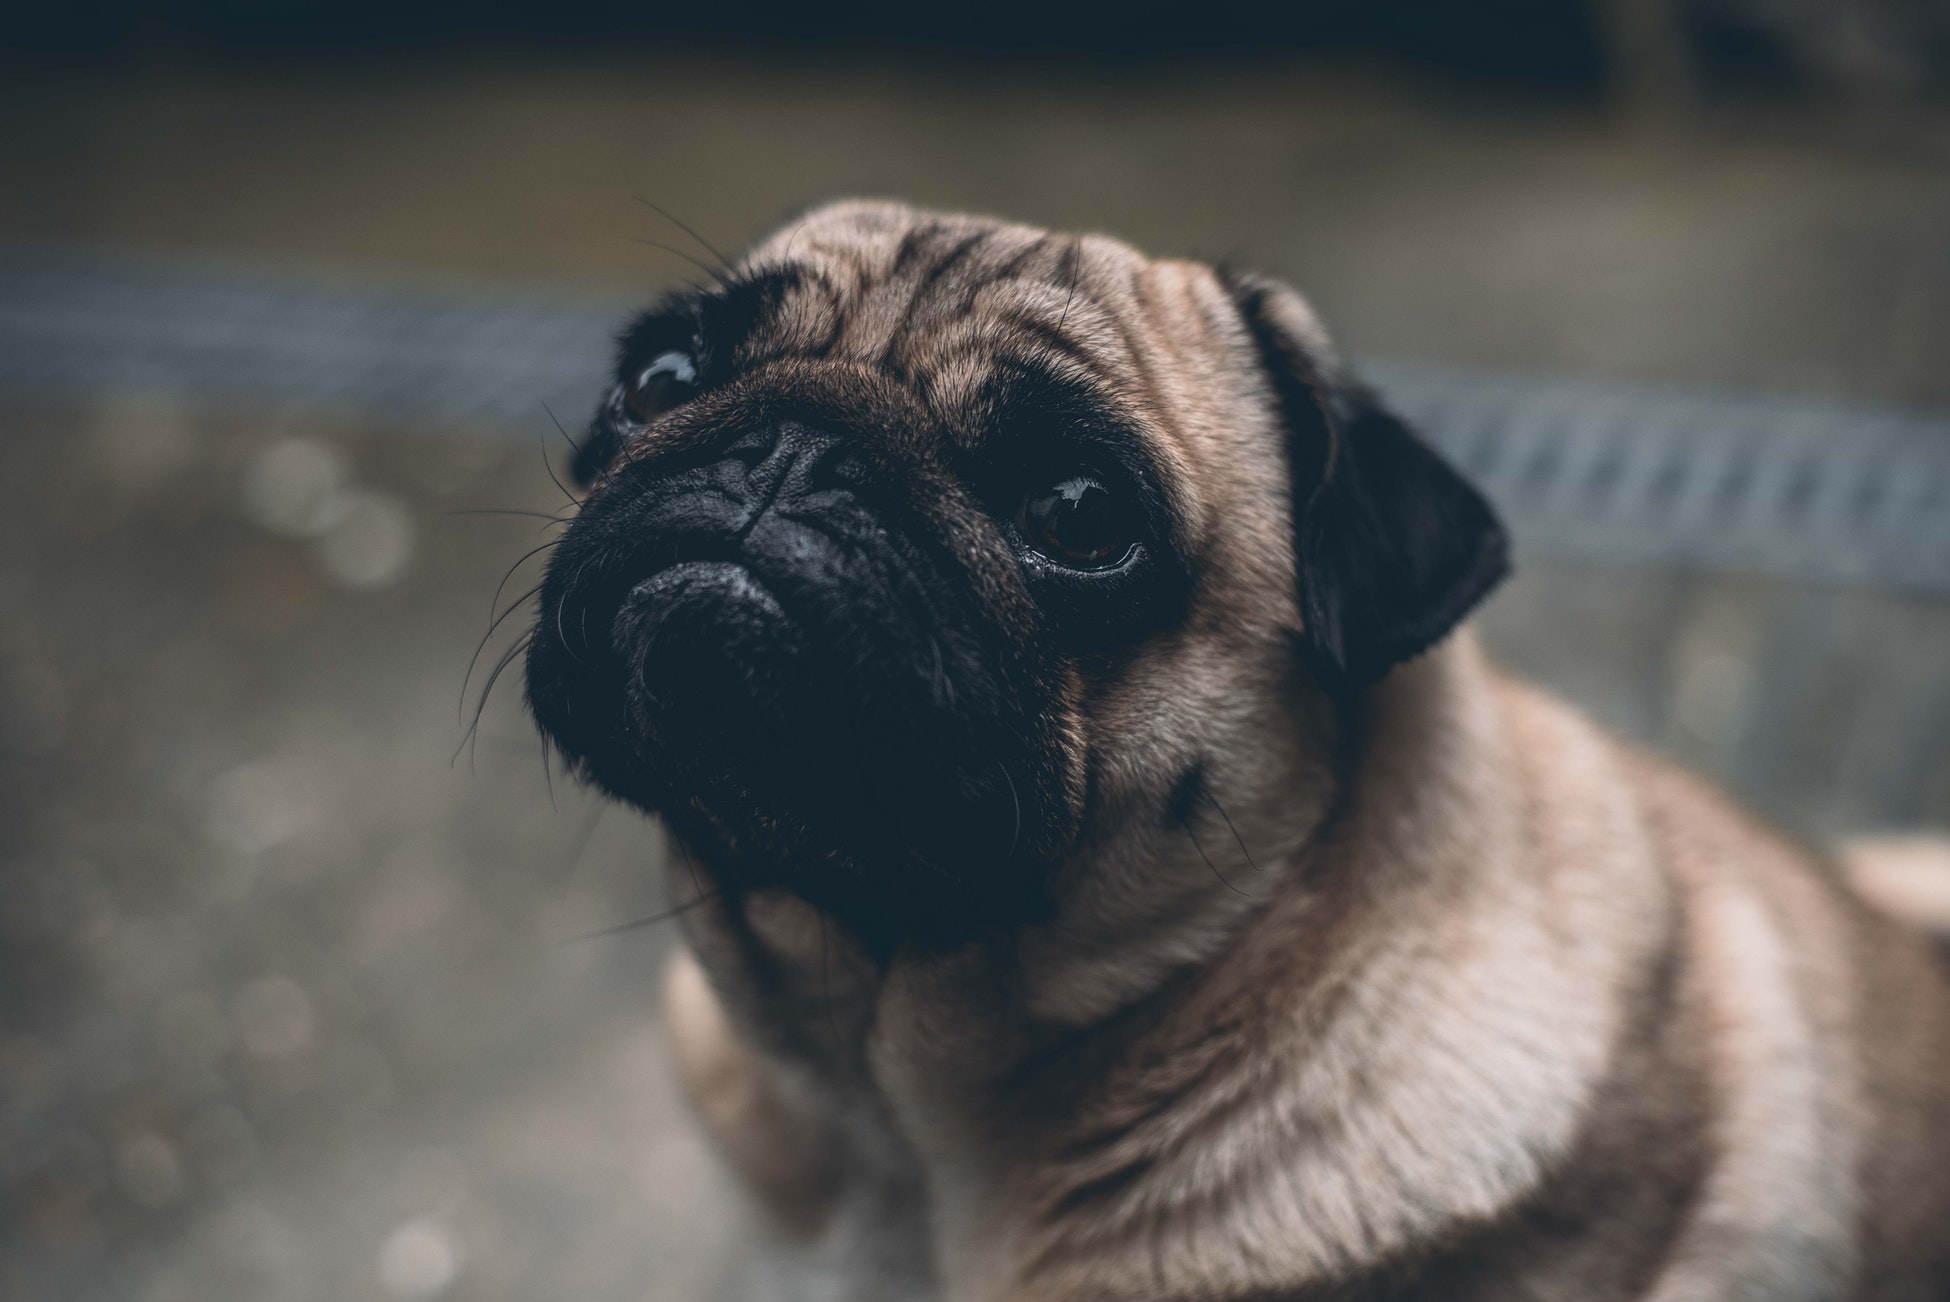 Certain types of dogs are more sensitive to heat – especially obese dogs and short-nosed breeds, like Pugs and Bulldogs.